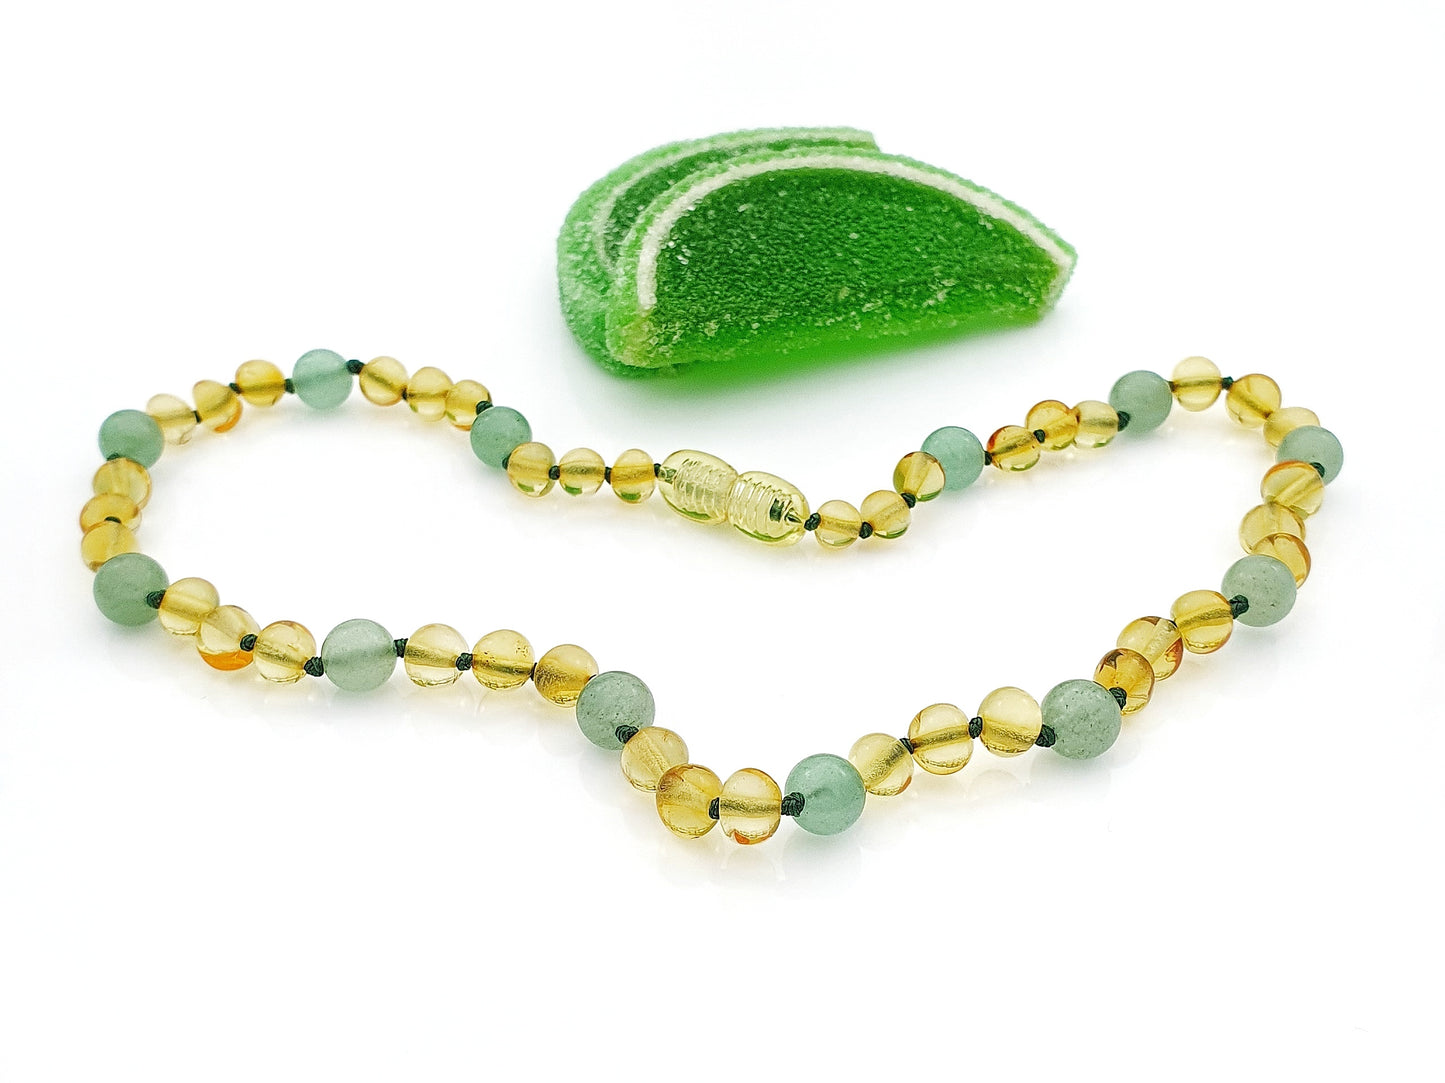 amber teething necklace with green stones